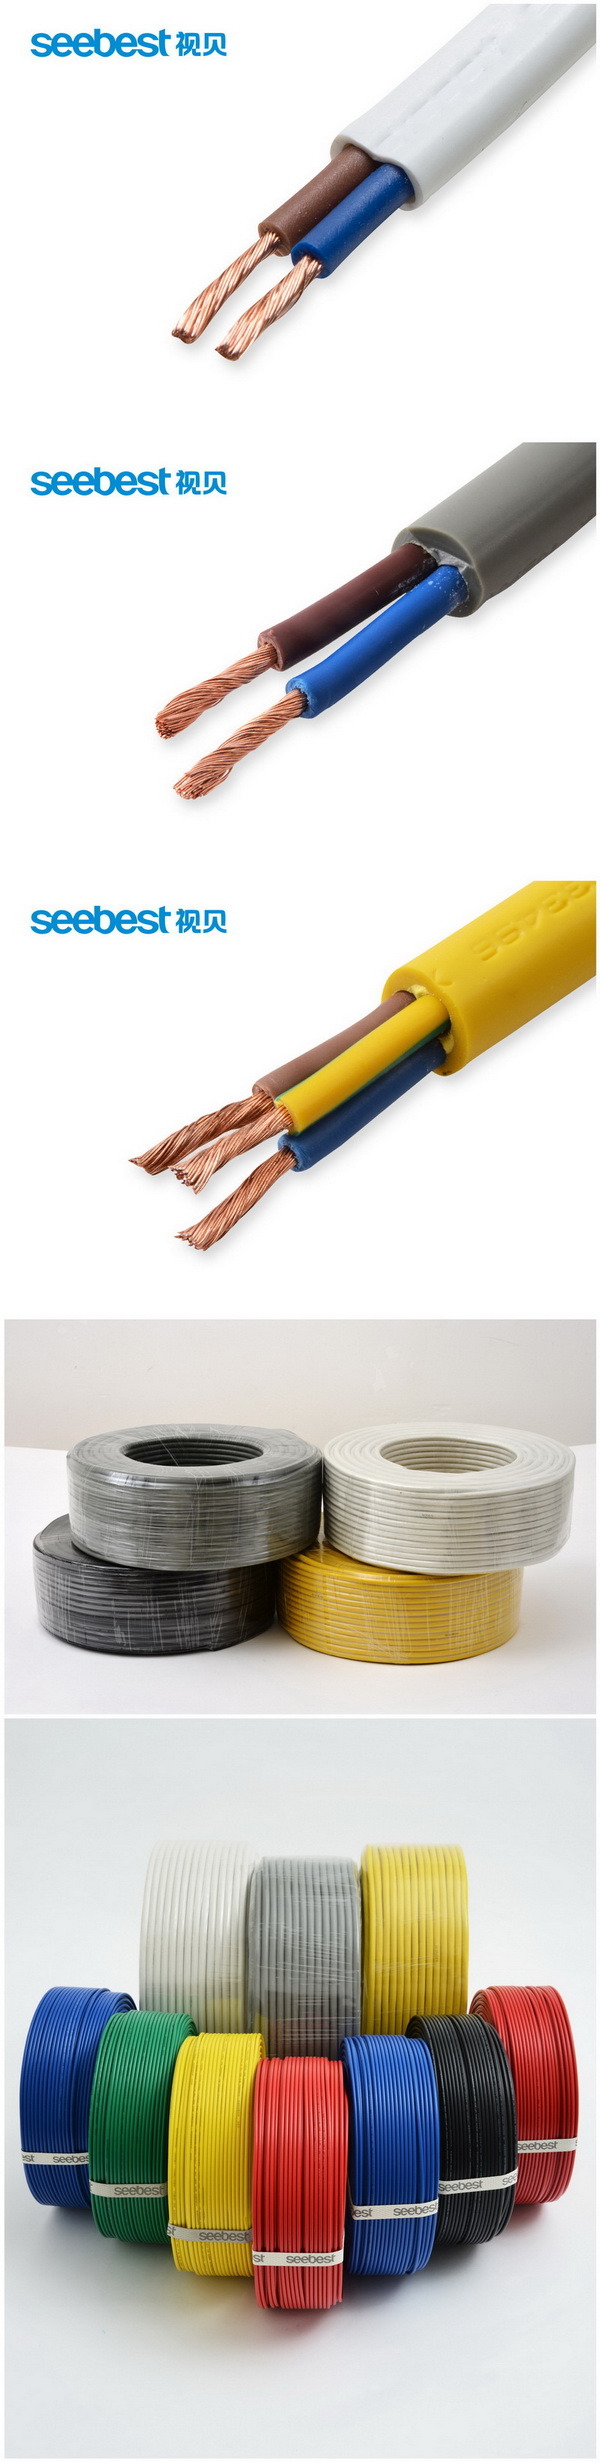 Environmental High Voltage Wire, Silicone Insulated Wire, Alpha Wire